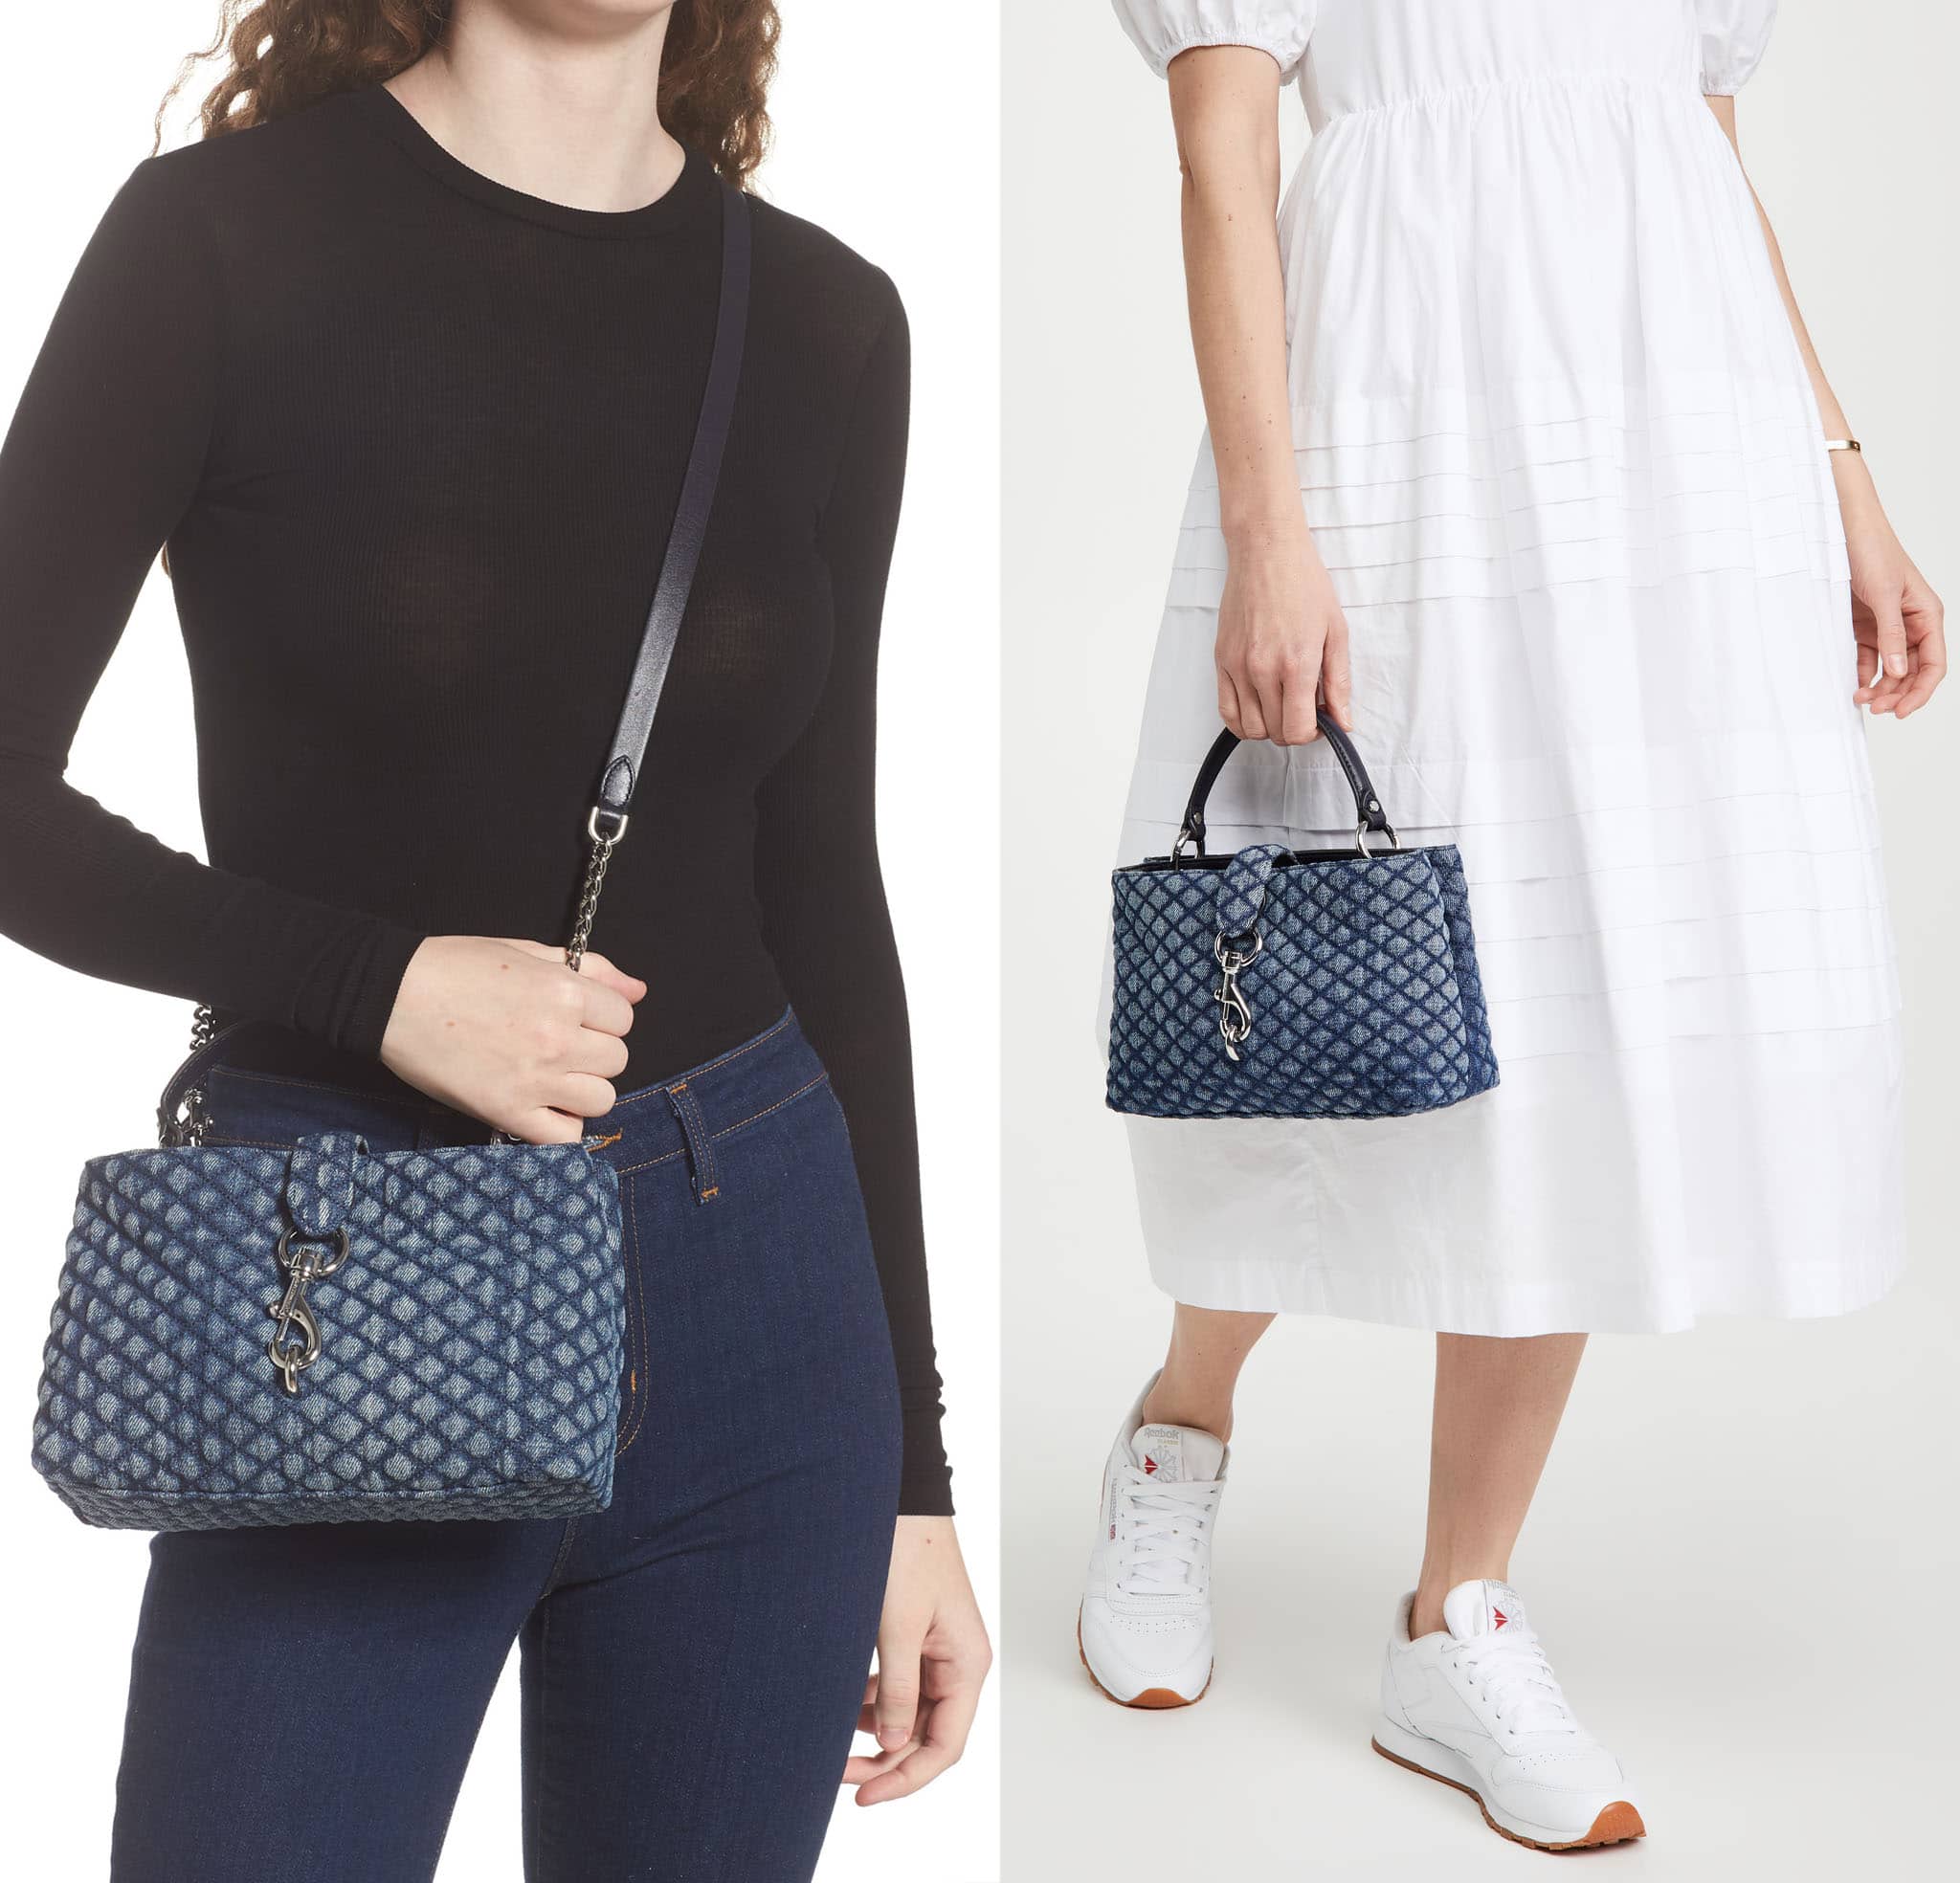 The Edie bag features a diamond-quilted denim design that brings a laid-back finish to a casual look